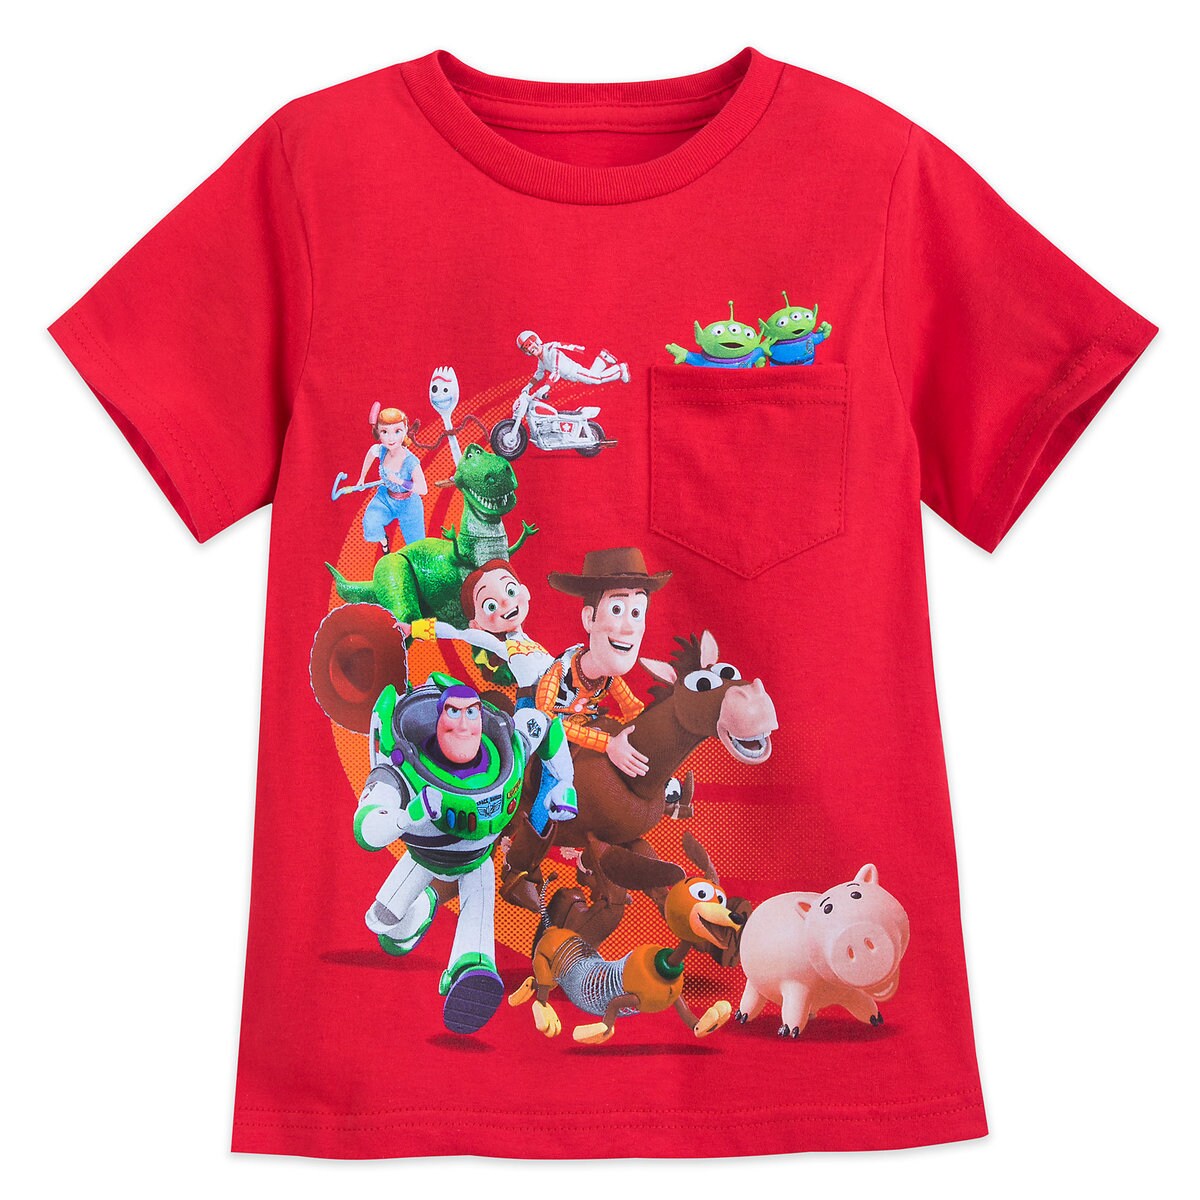 Product Image of Toy Story 4 Cast T-Shirt for Boys # 1